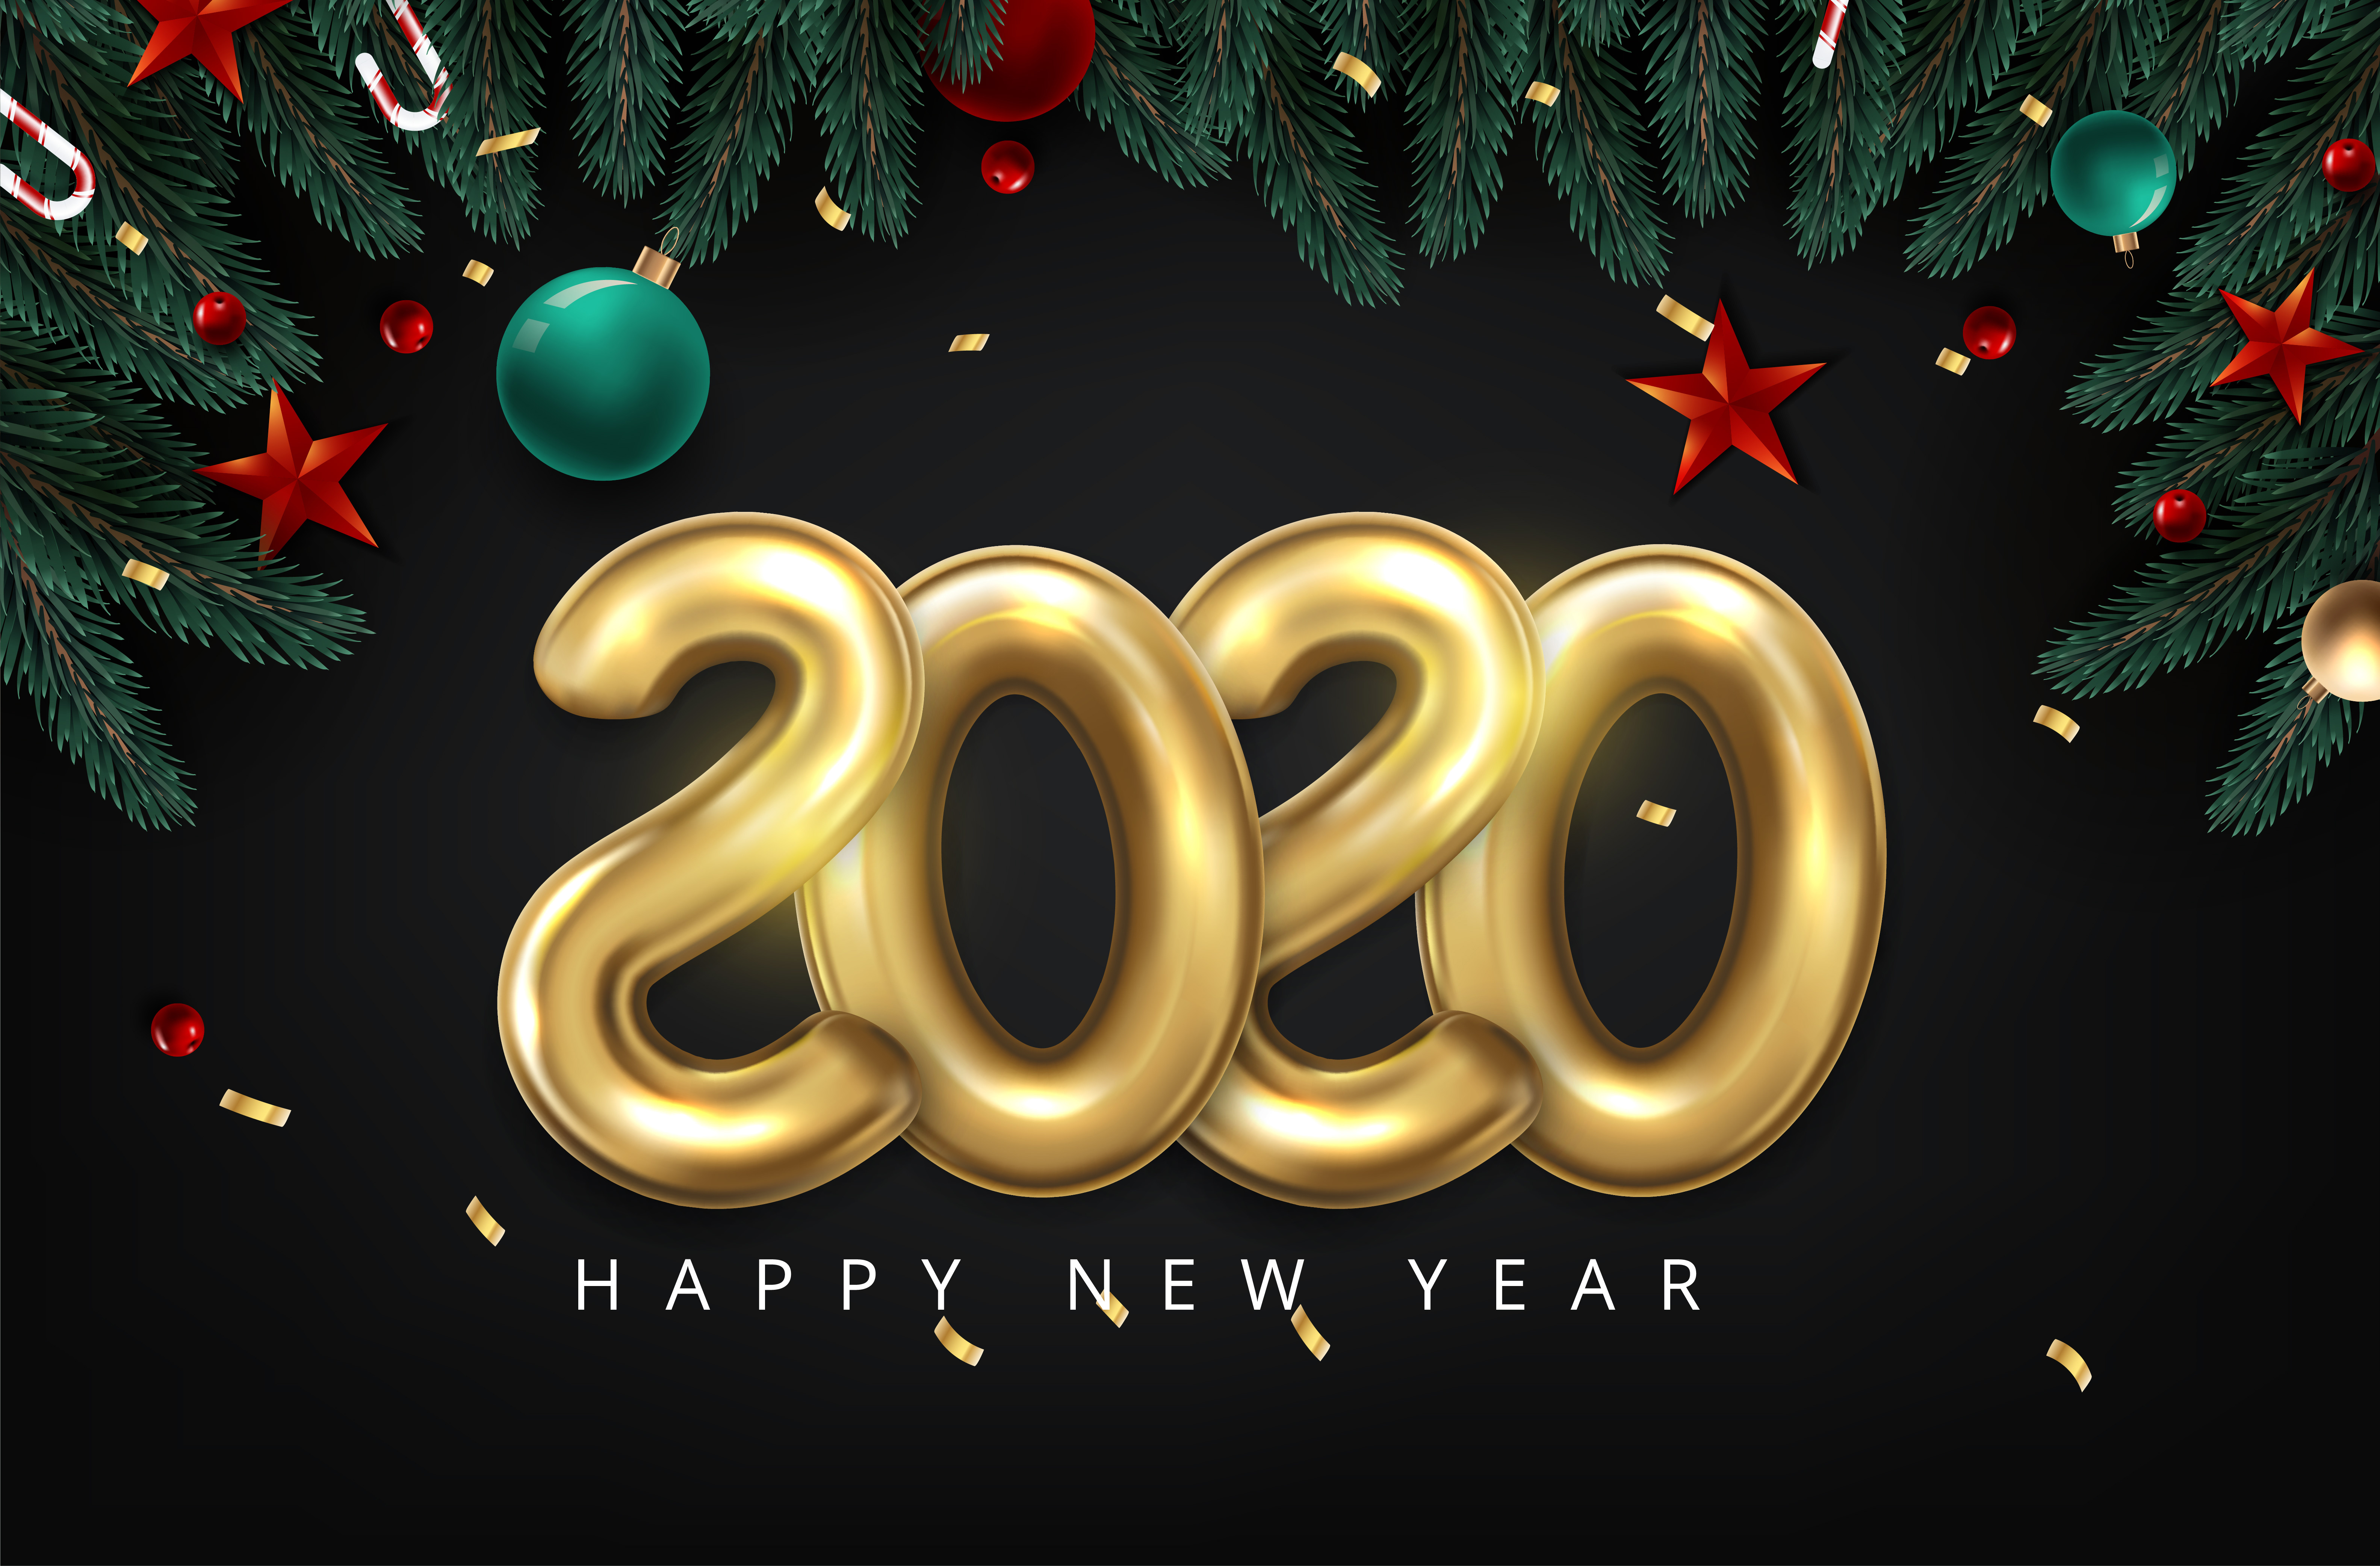 Download Happy New Year New Year Holiday New Year 2020 4k Ultra Hd Wallpaper 4746